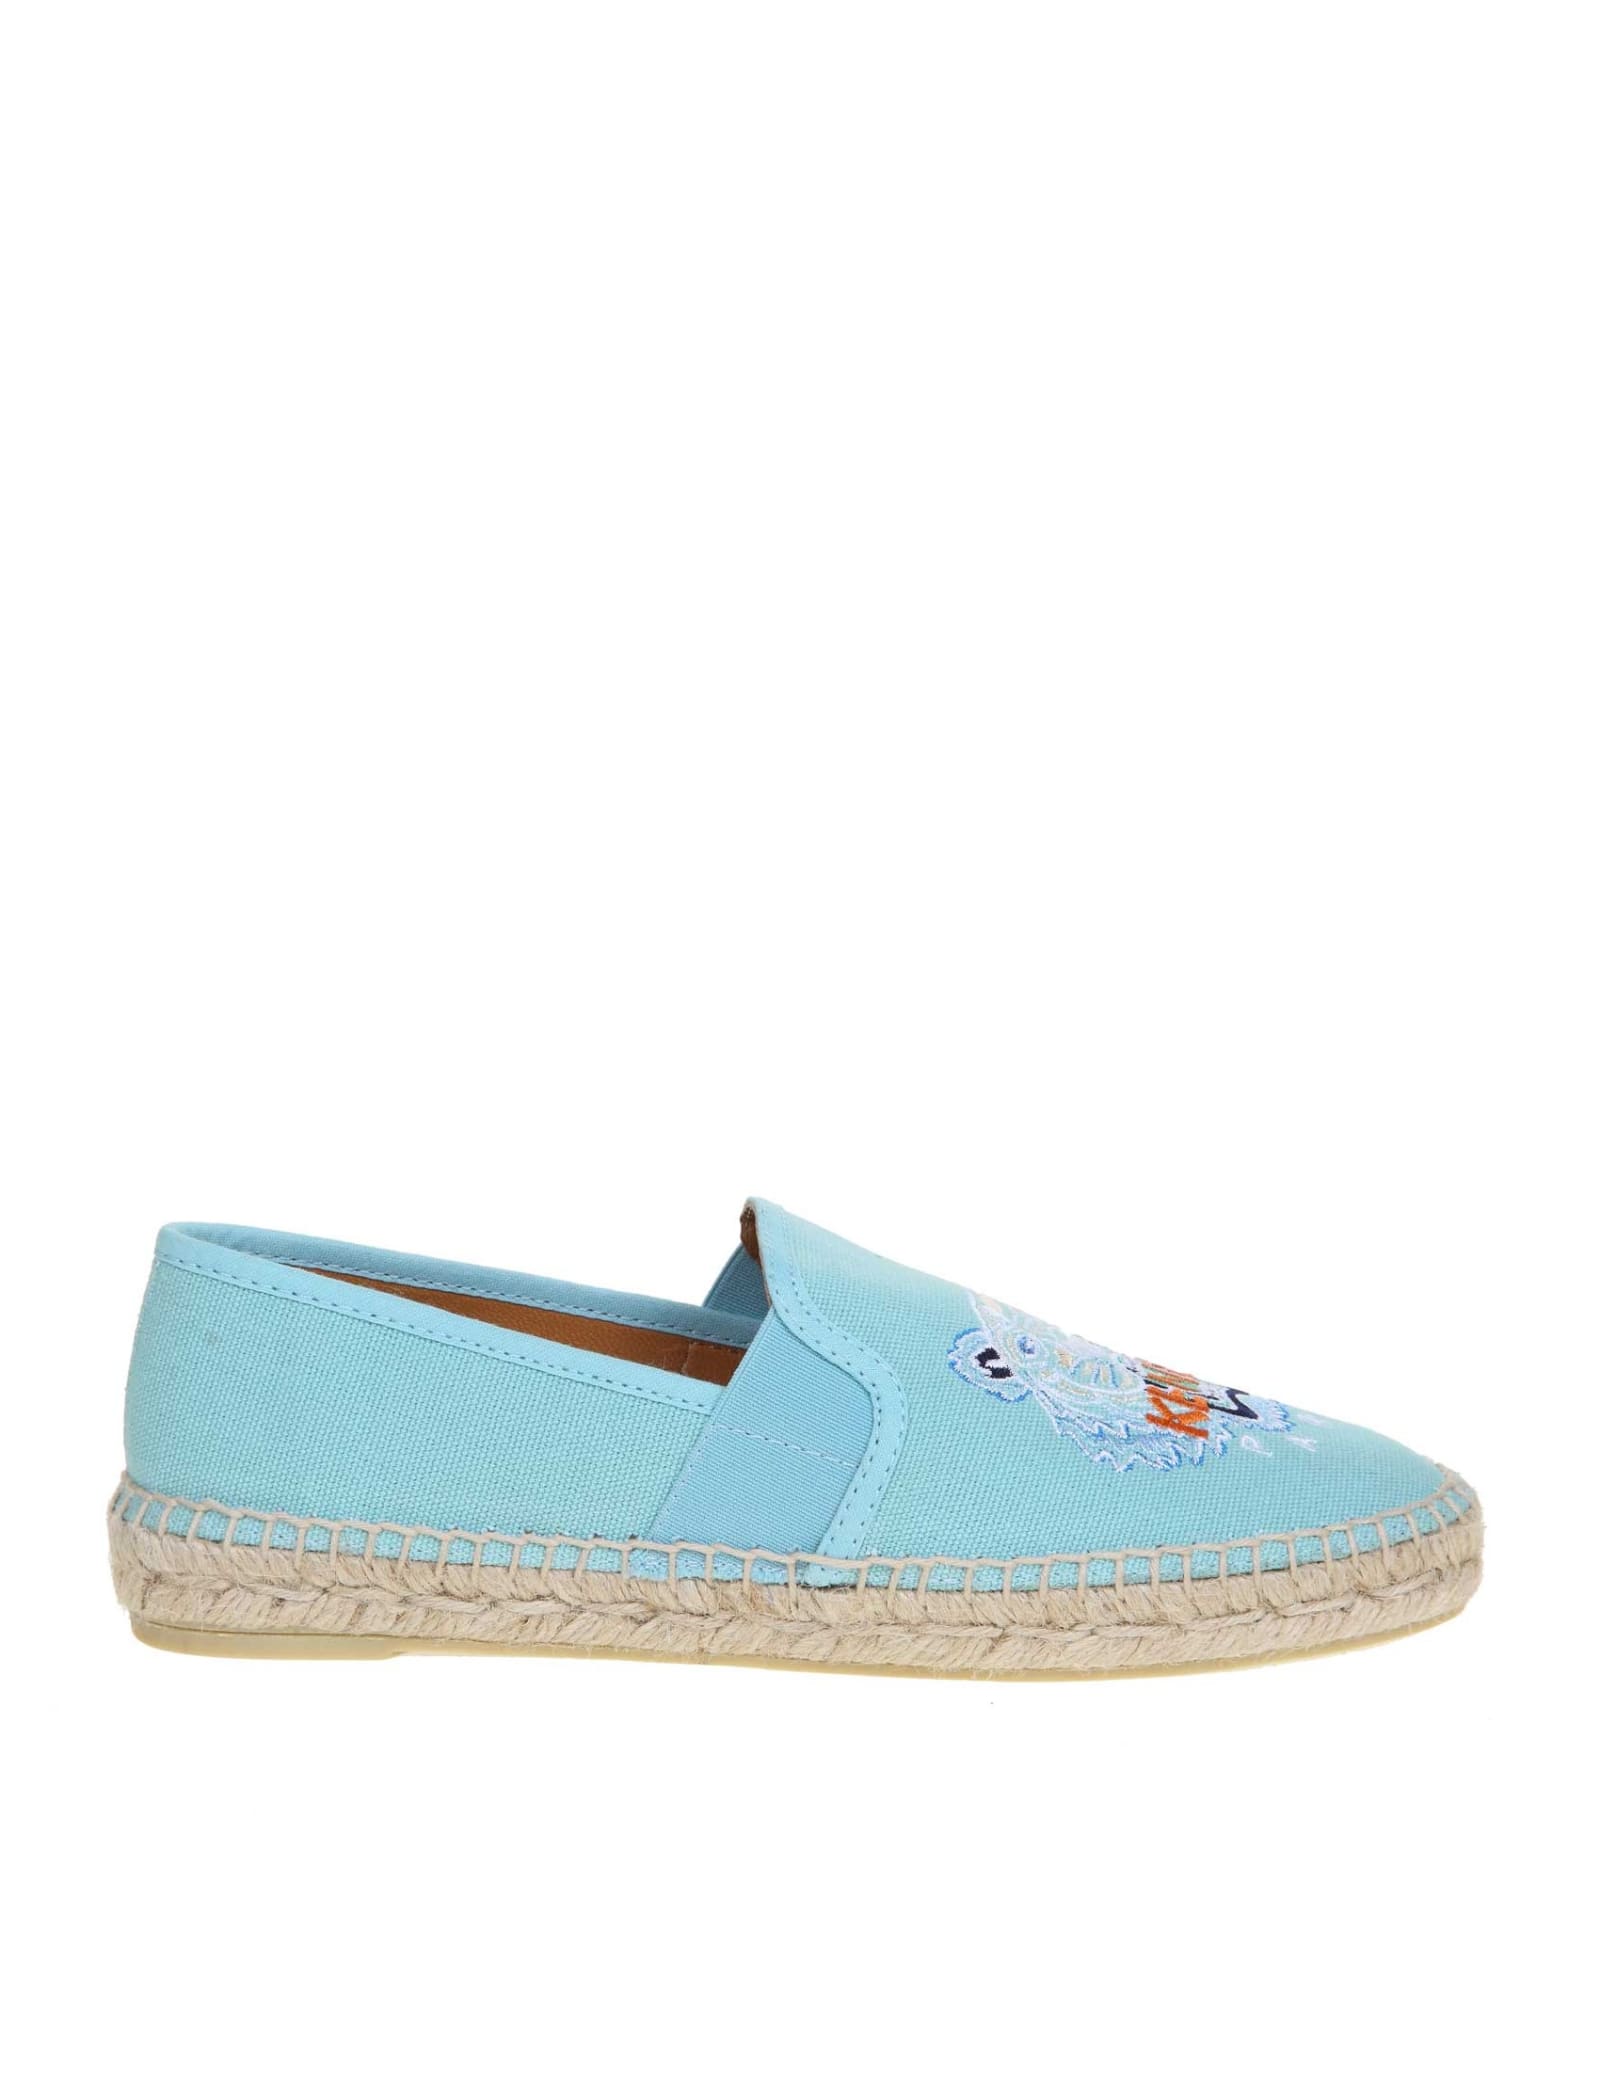 KENZO ESPADRILLES IN COTTON CANVAS WITH LOGO,11213534